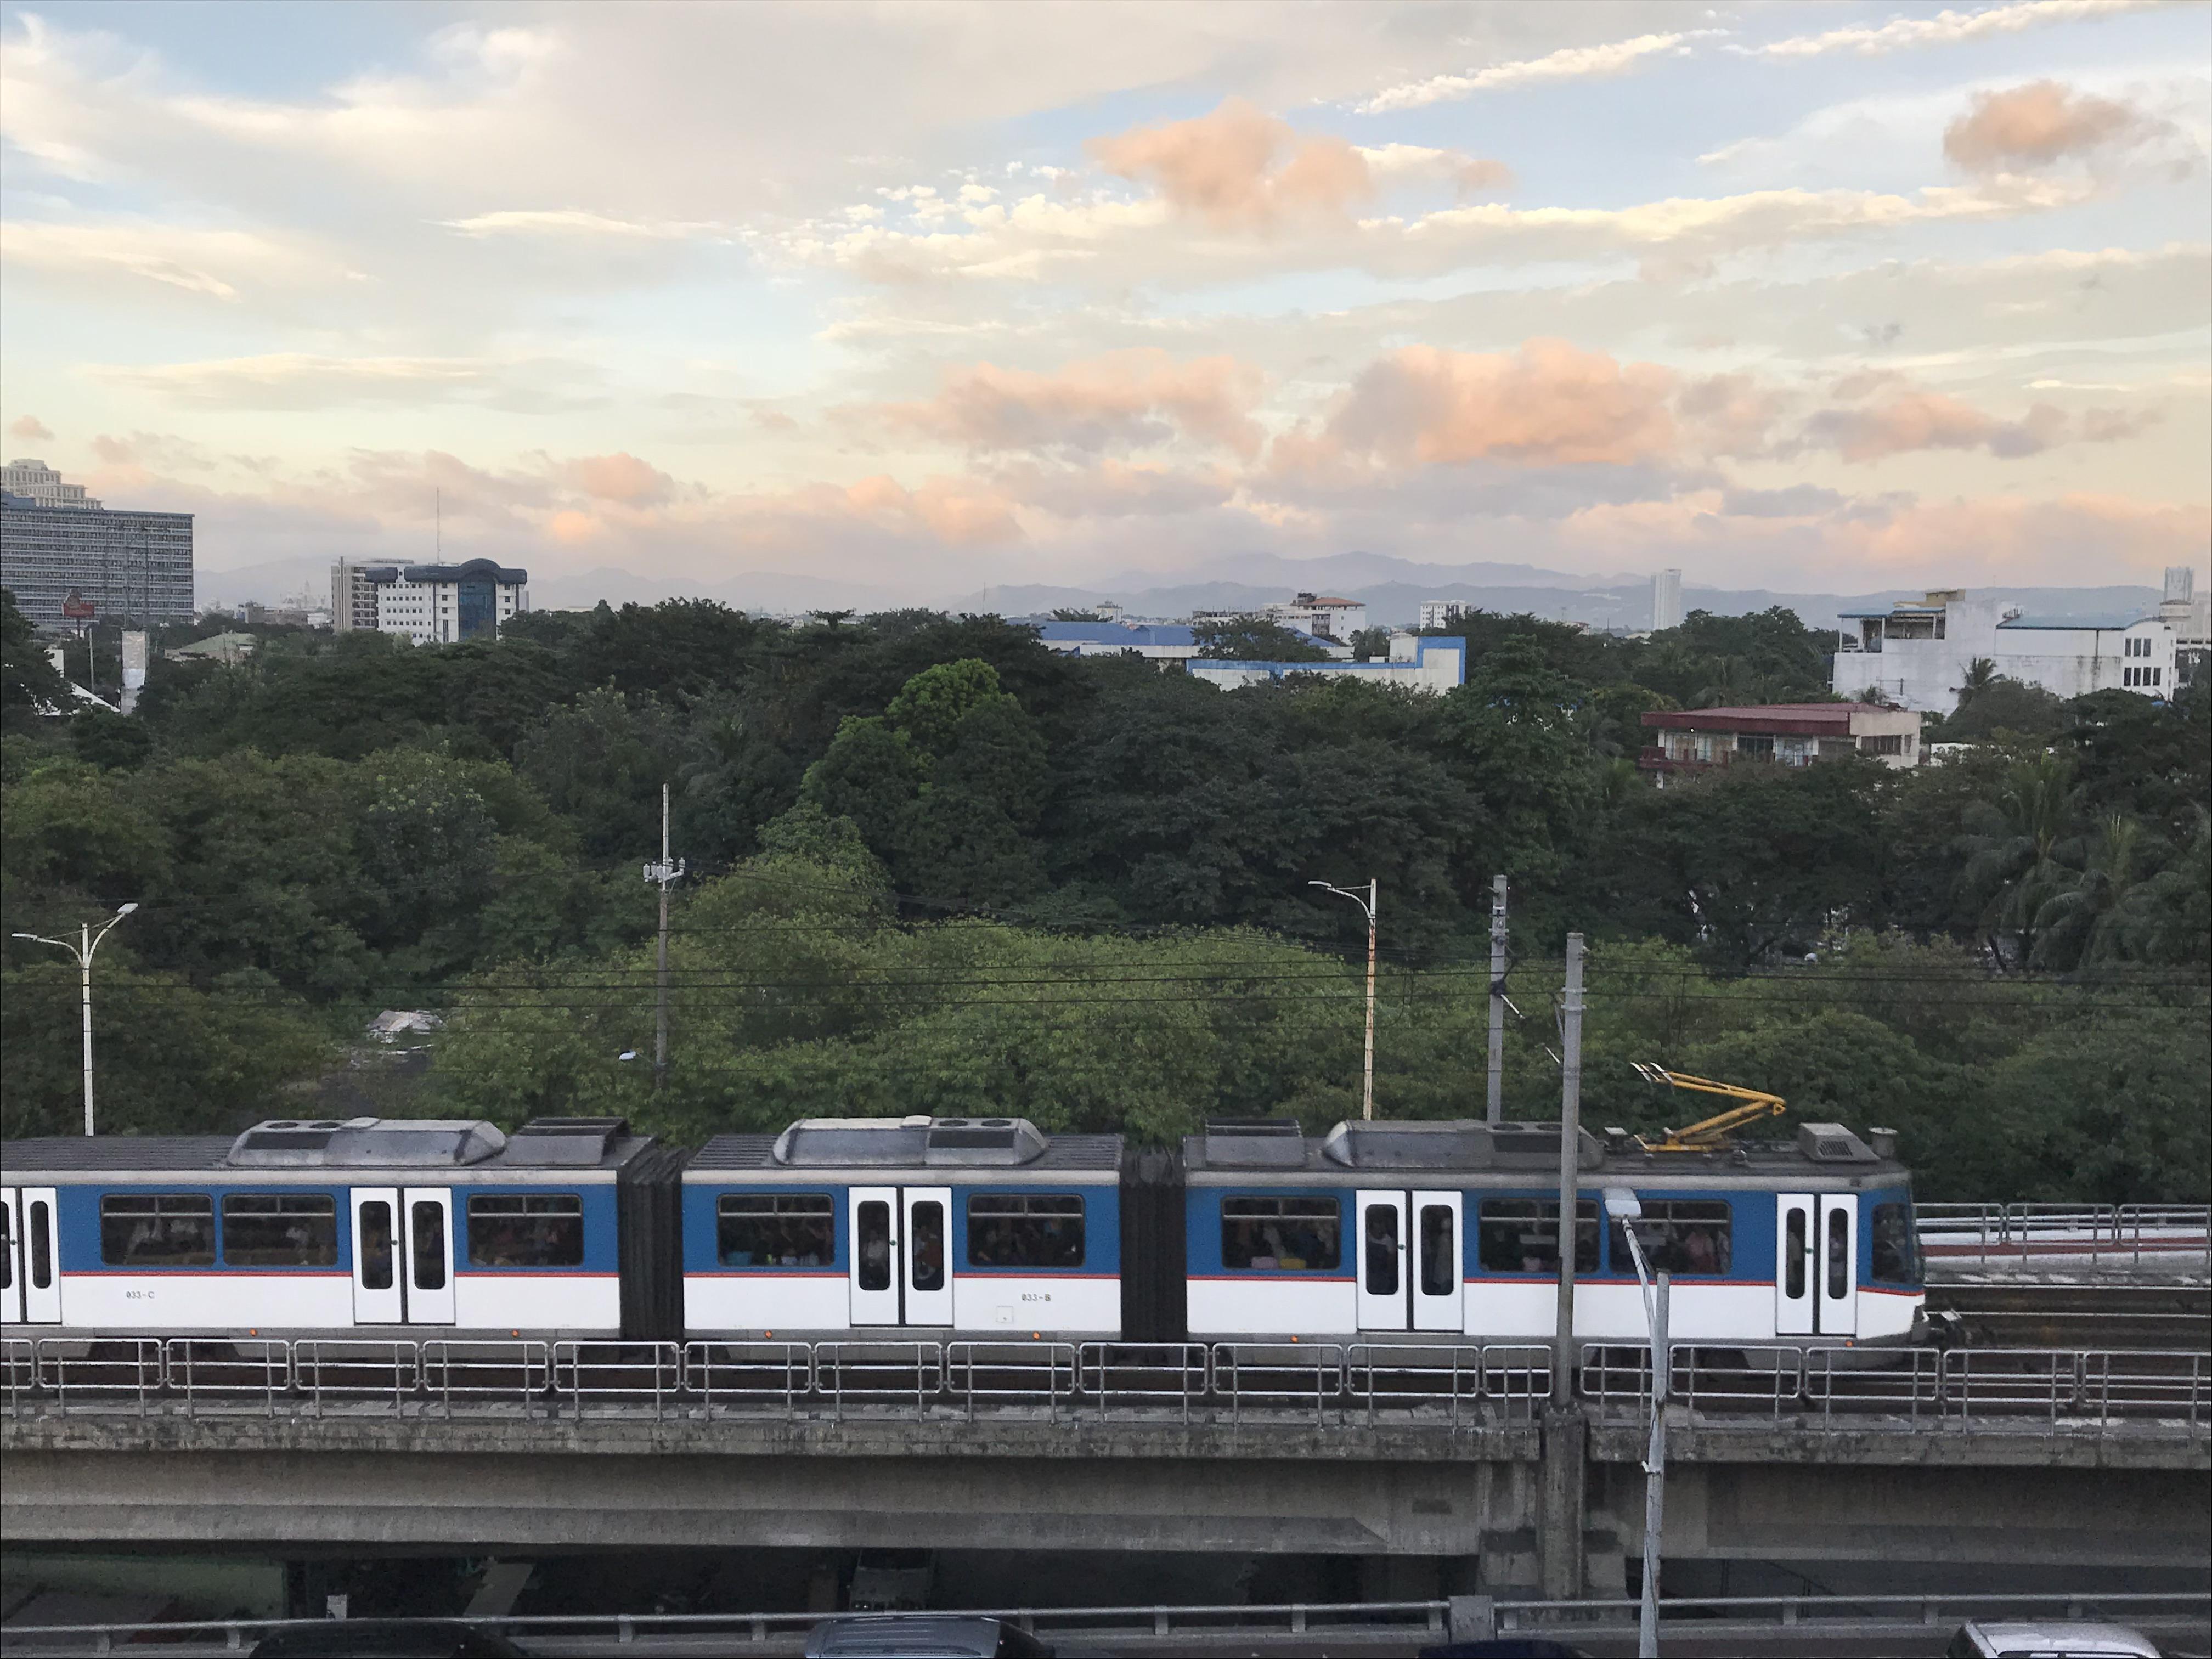 A southbound MRT3 train chugs on its tracks at 5:30 p.m. Wednesday, Nov. 29, 2017, near the junction of EDSA and Timog Ave. in Quezon City. Photo by Victor D. Sollorano, GMA News